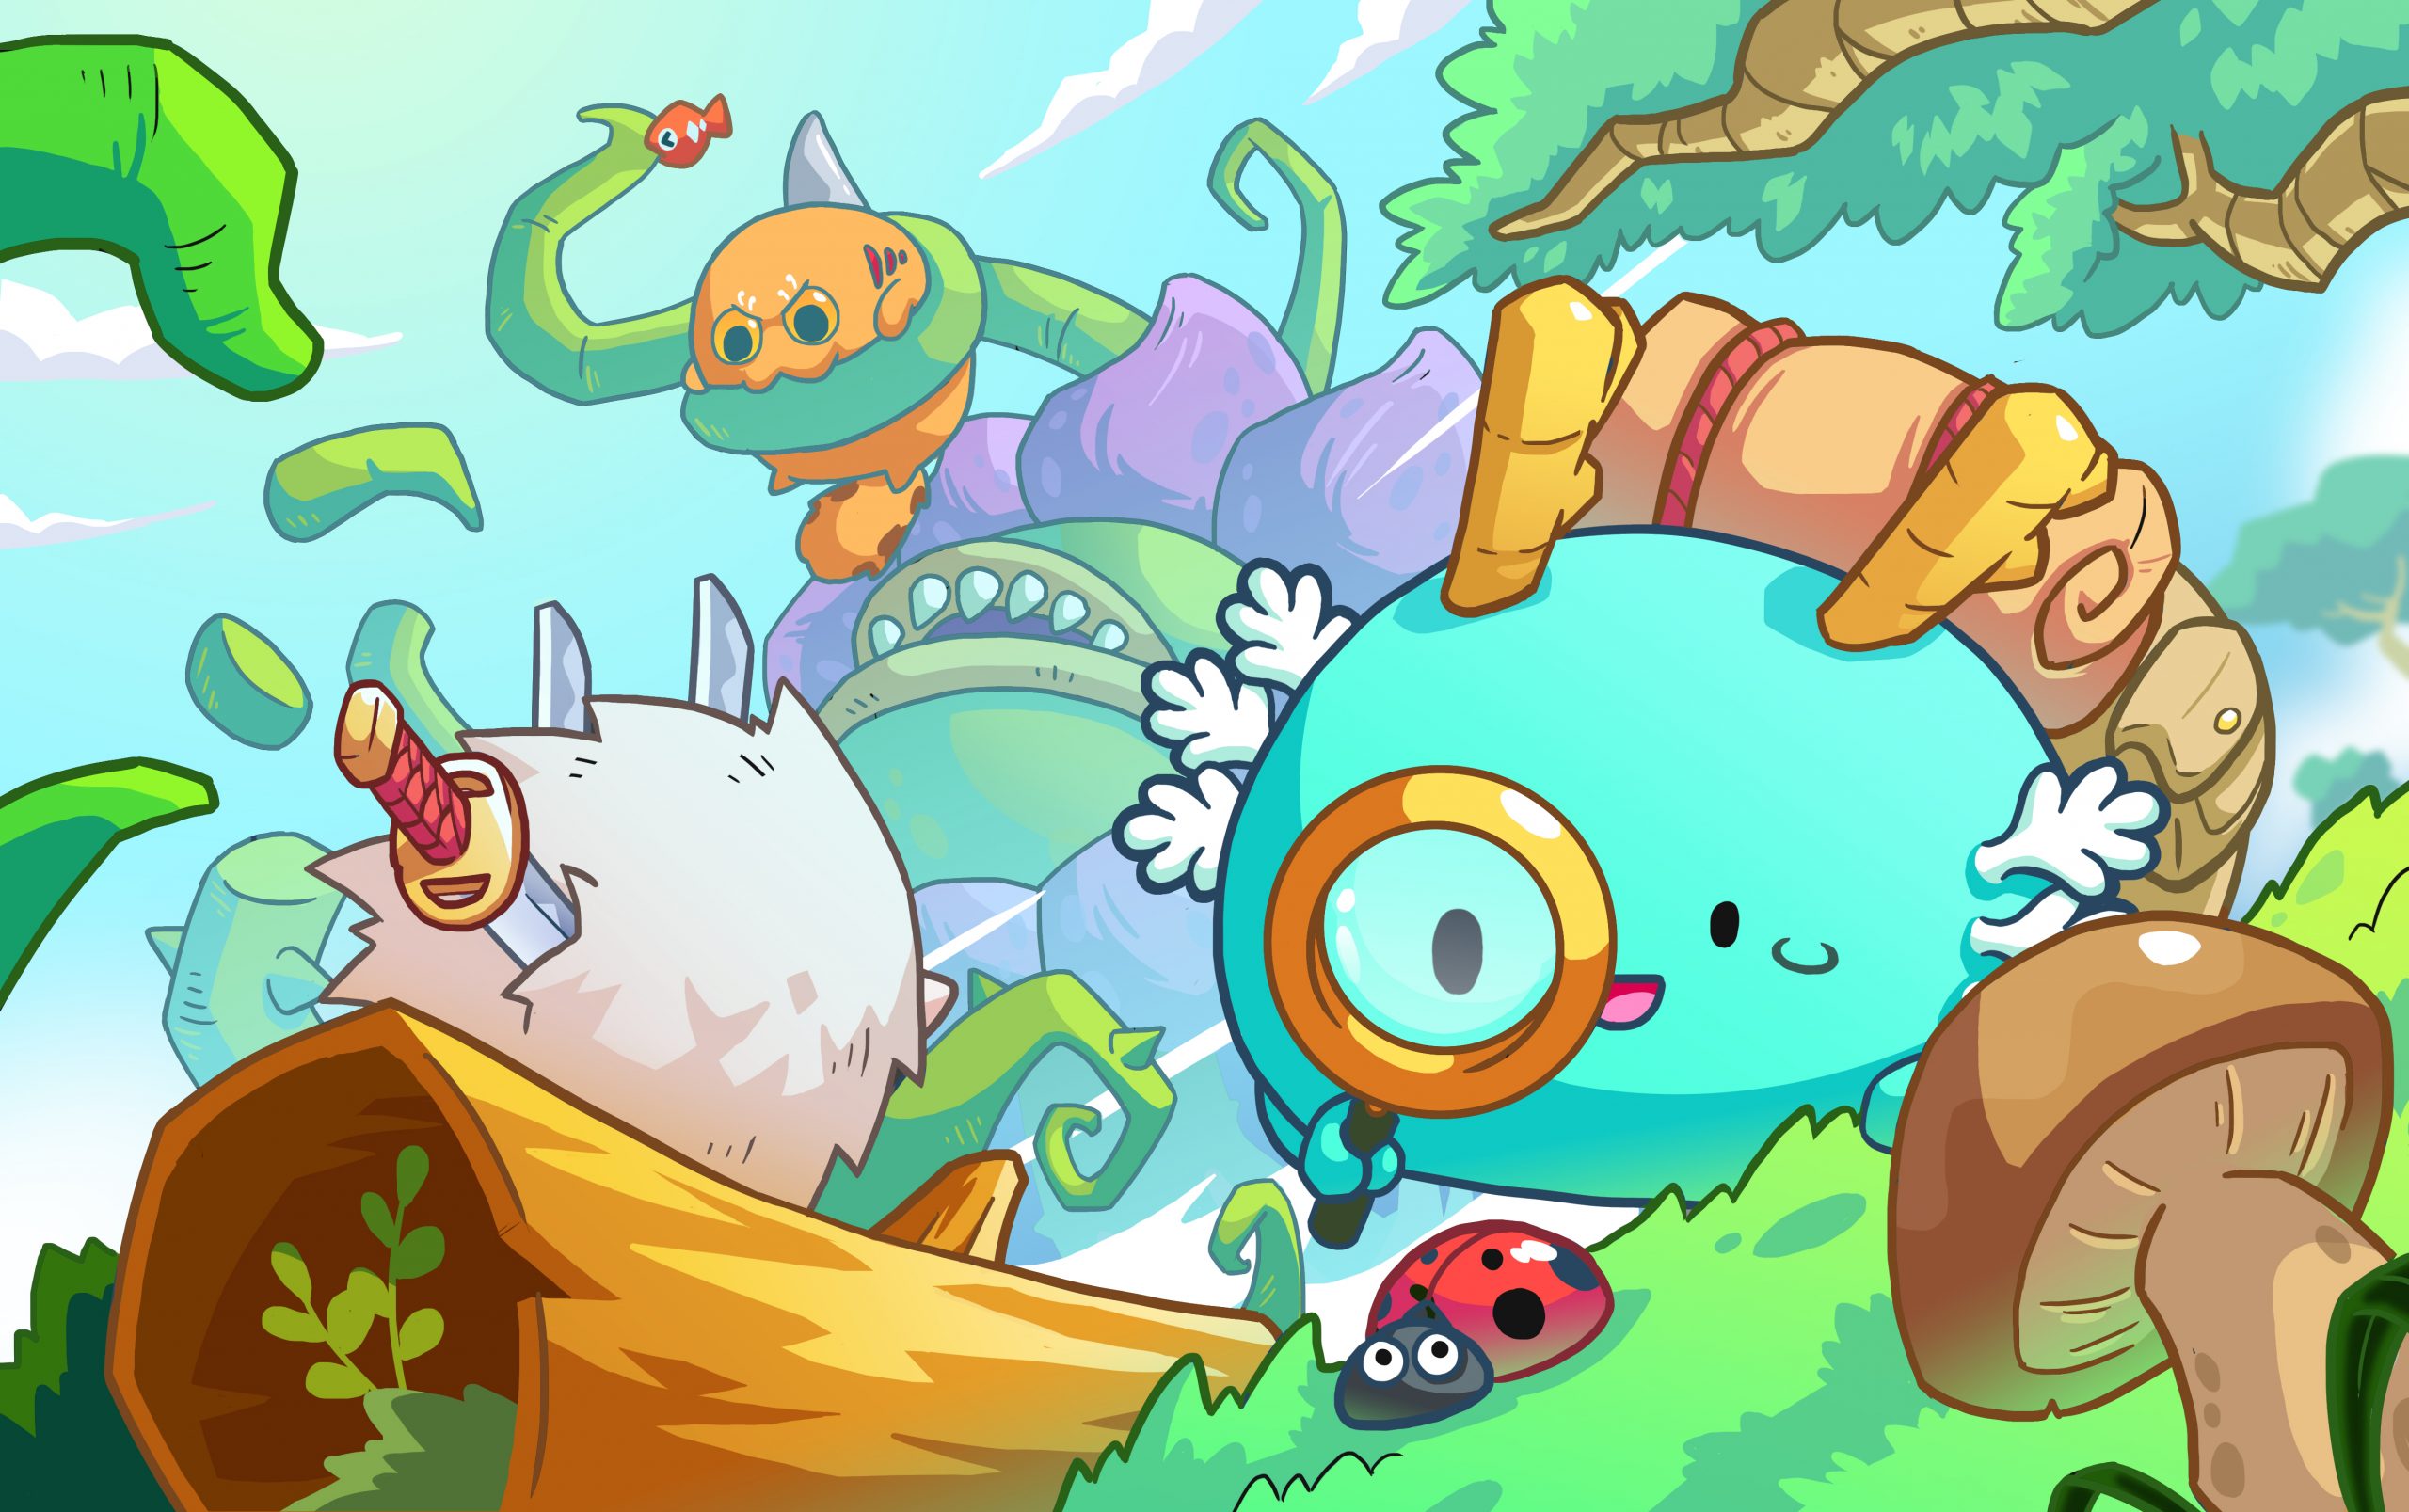 Axie Infinity play to earn blockchain game land